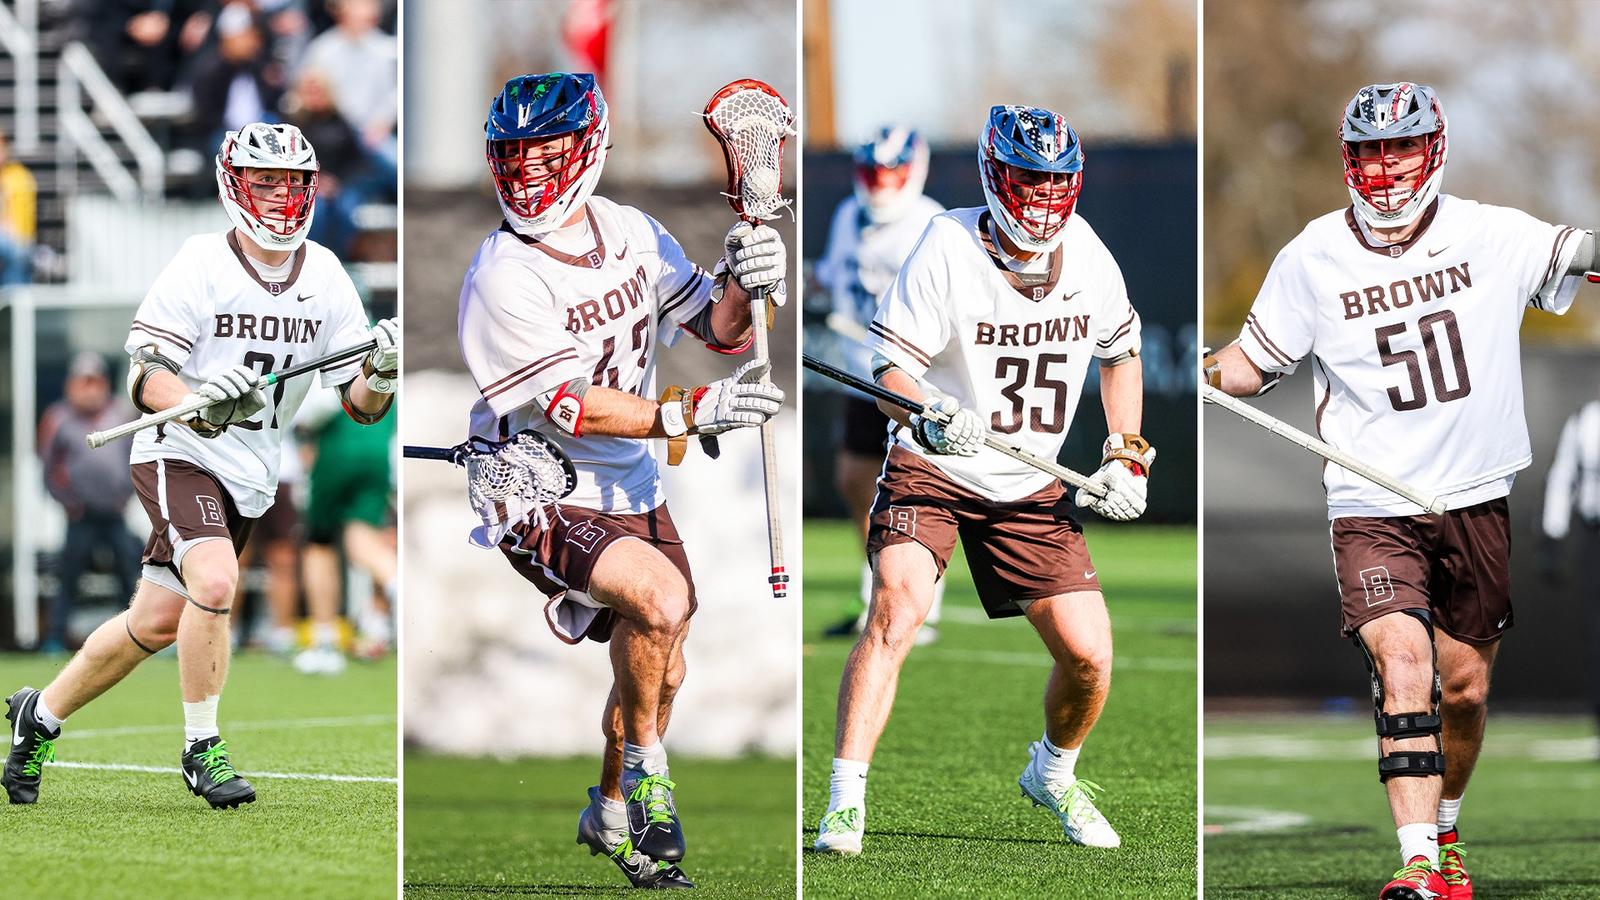 Four Bears Pick Up Men’s Lacrosse All-Ivy Honors